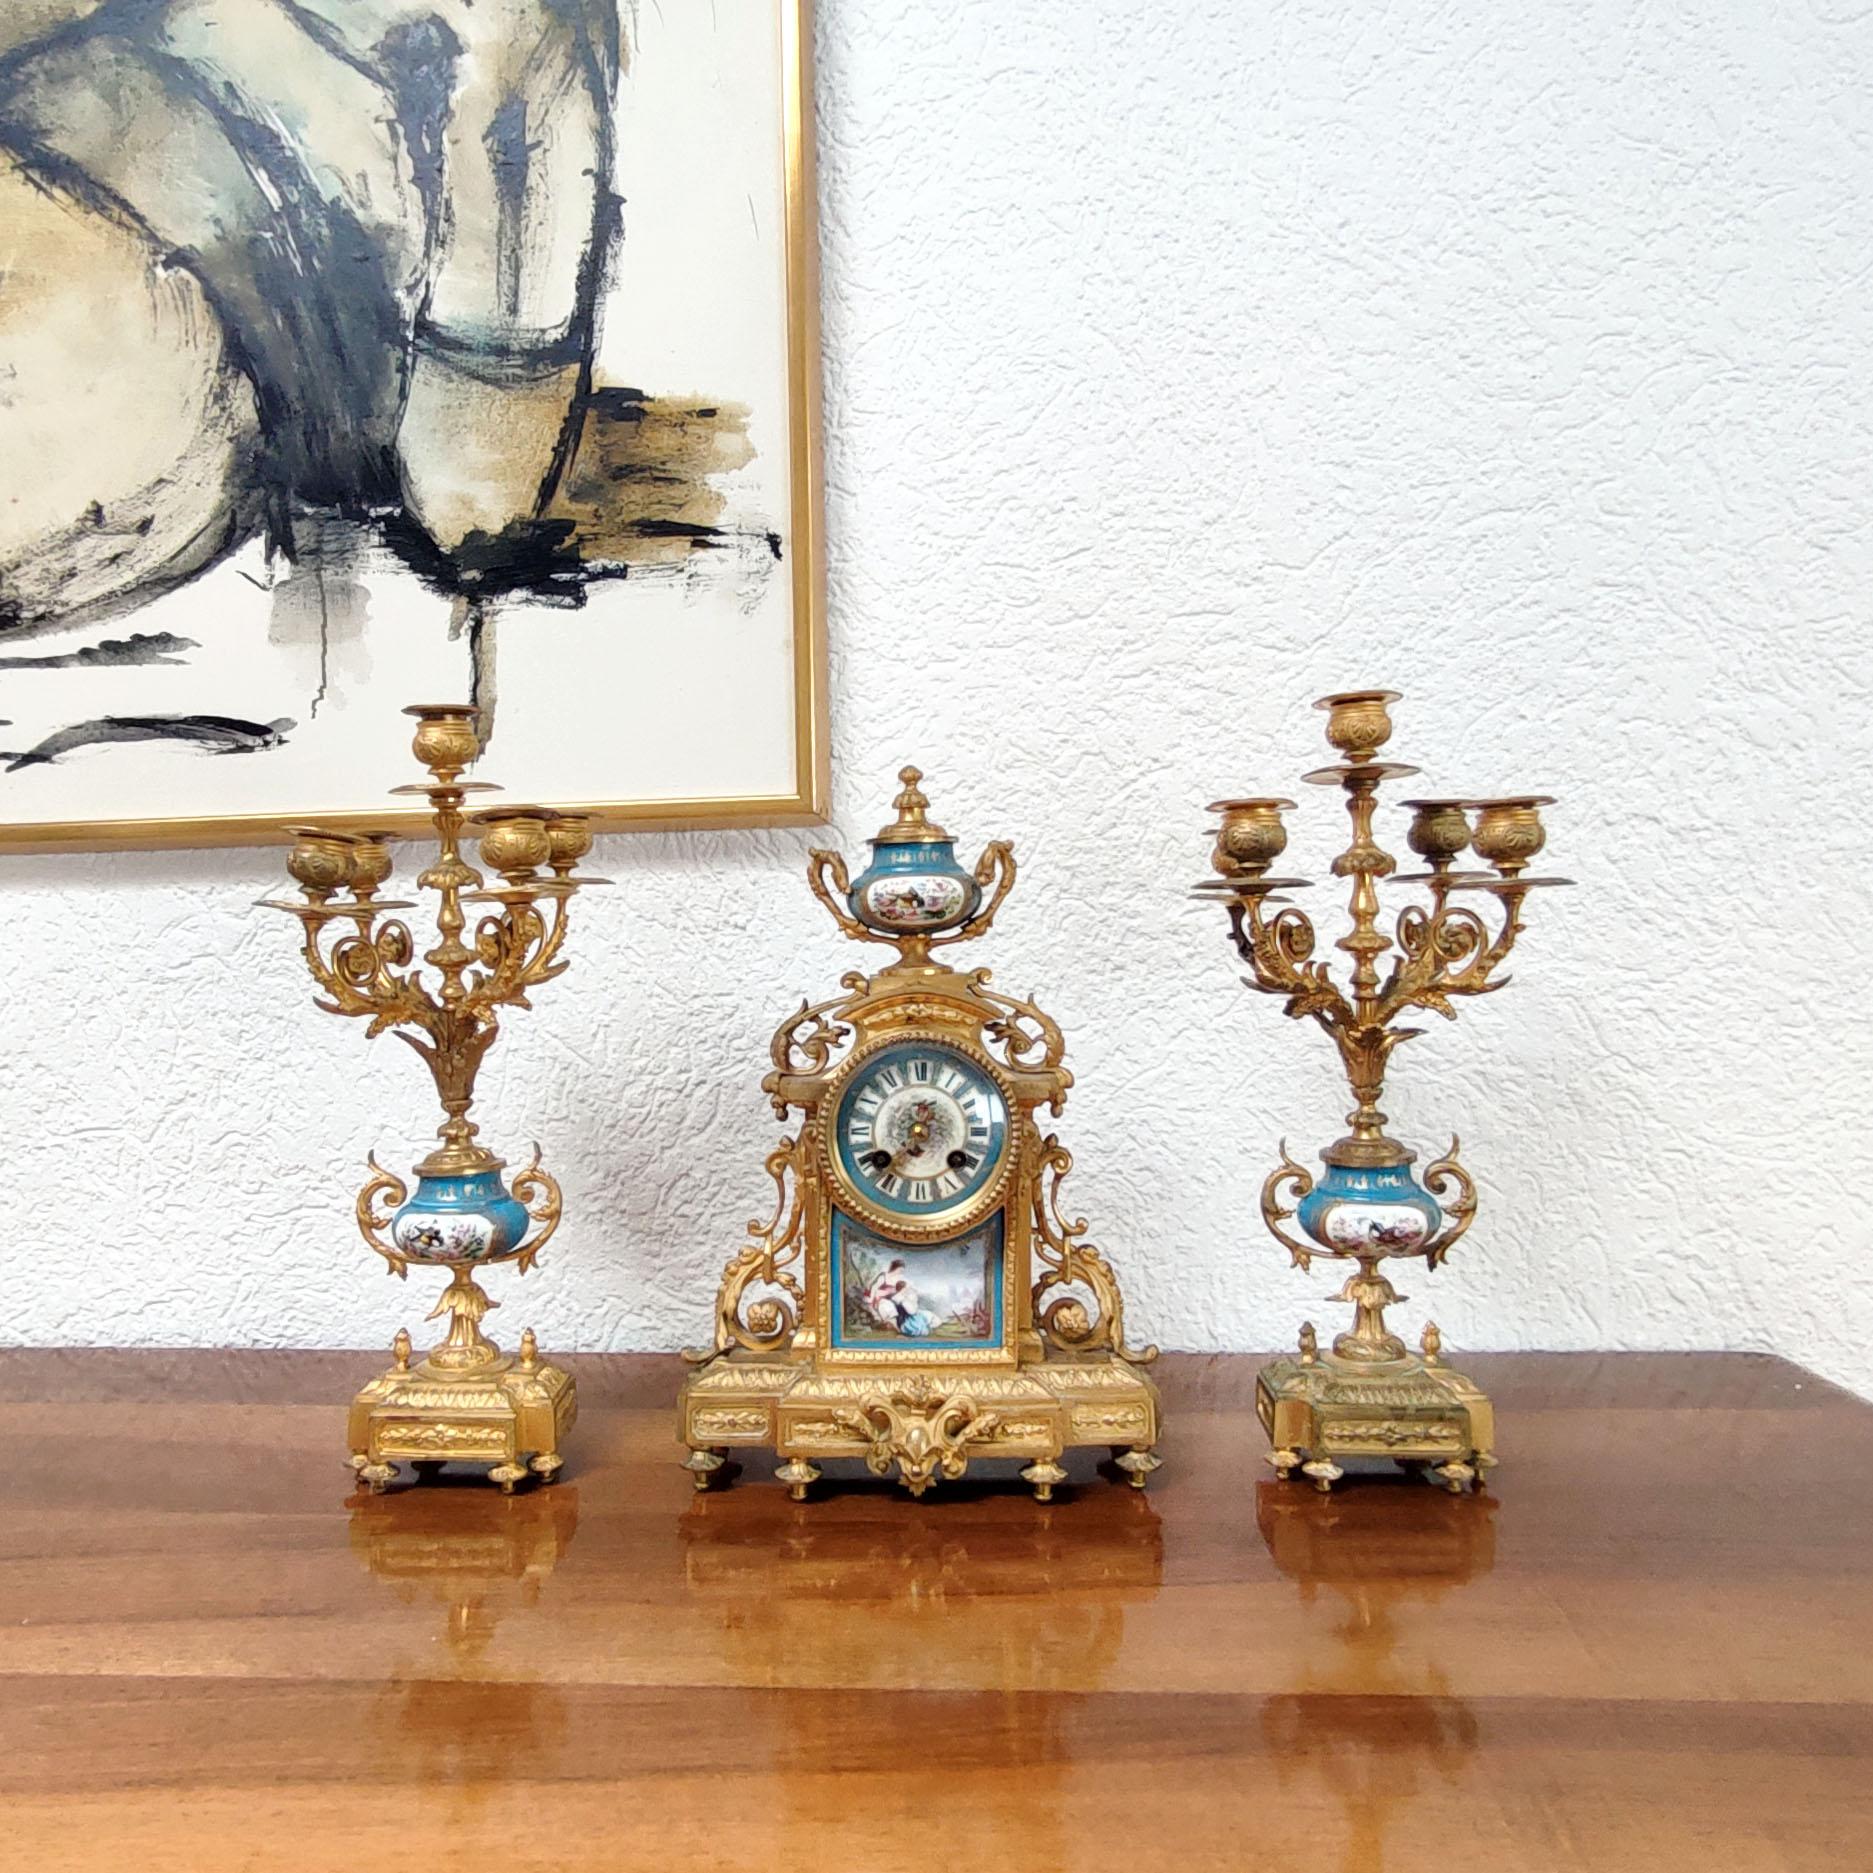 Antique French Louis XVI ormolu and porcelain mantle clock and pair of candelabra, late 19th century.
Gilt bronze and porcelain chimney accessories in the style of Sevres.
The pendulum clock is ornate with a porcelain plaque with décor of young